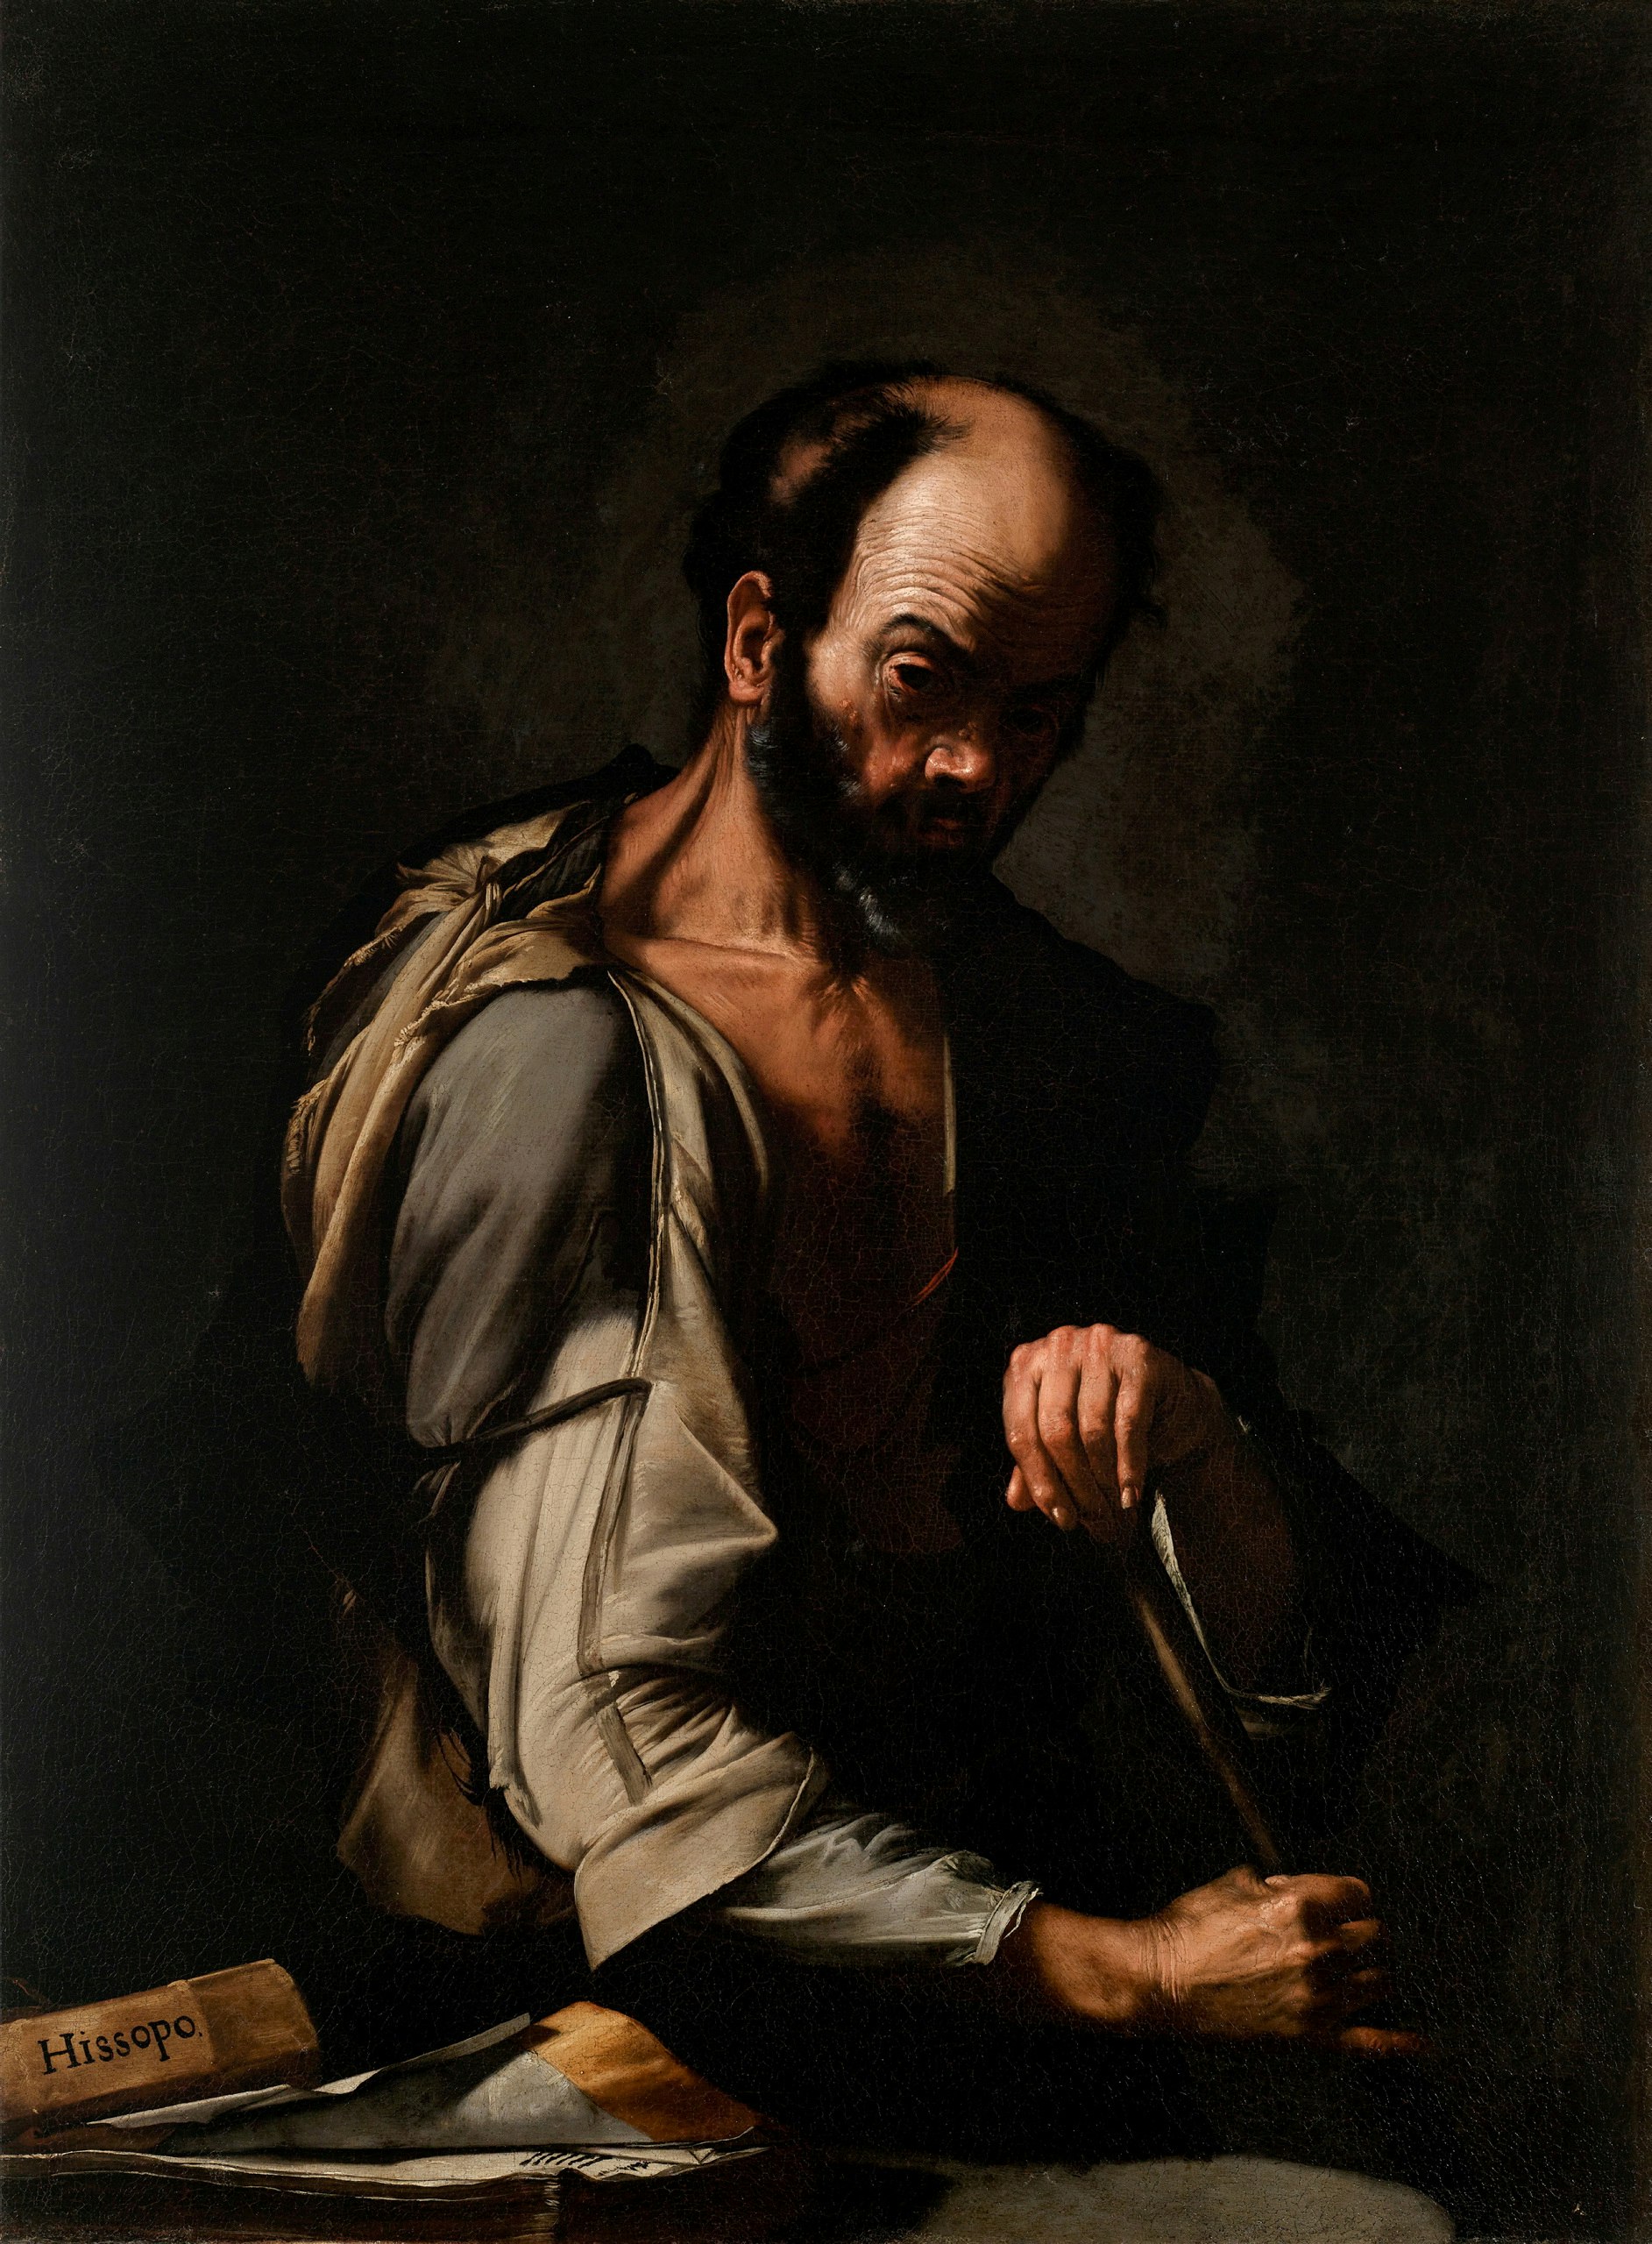 Jusepe de Ribera, Aesop c1625—31, oil on canvas, 125 x 92 cm, Art Gallery of New South Wales, purchased in 2021 with funds provided by the Art Gallery NSW Foundation and the Art Gallery NSW 2019 Gala dinner